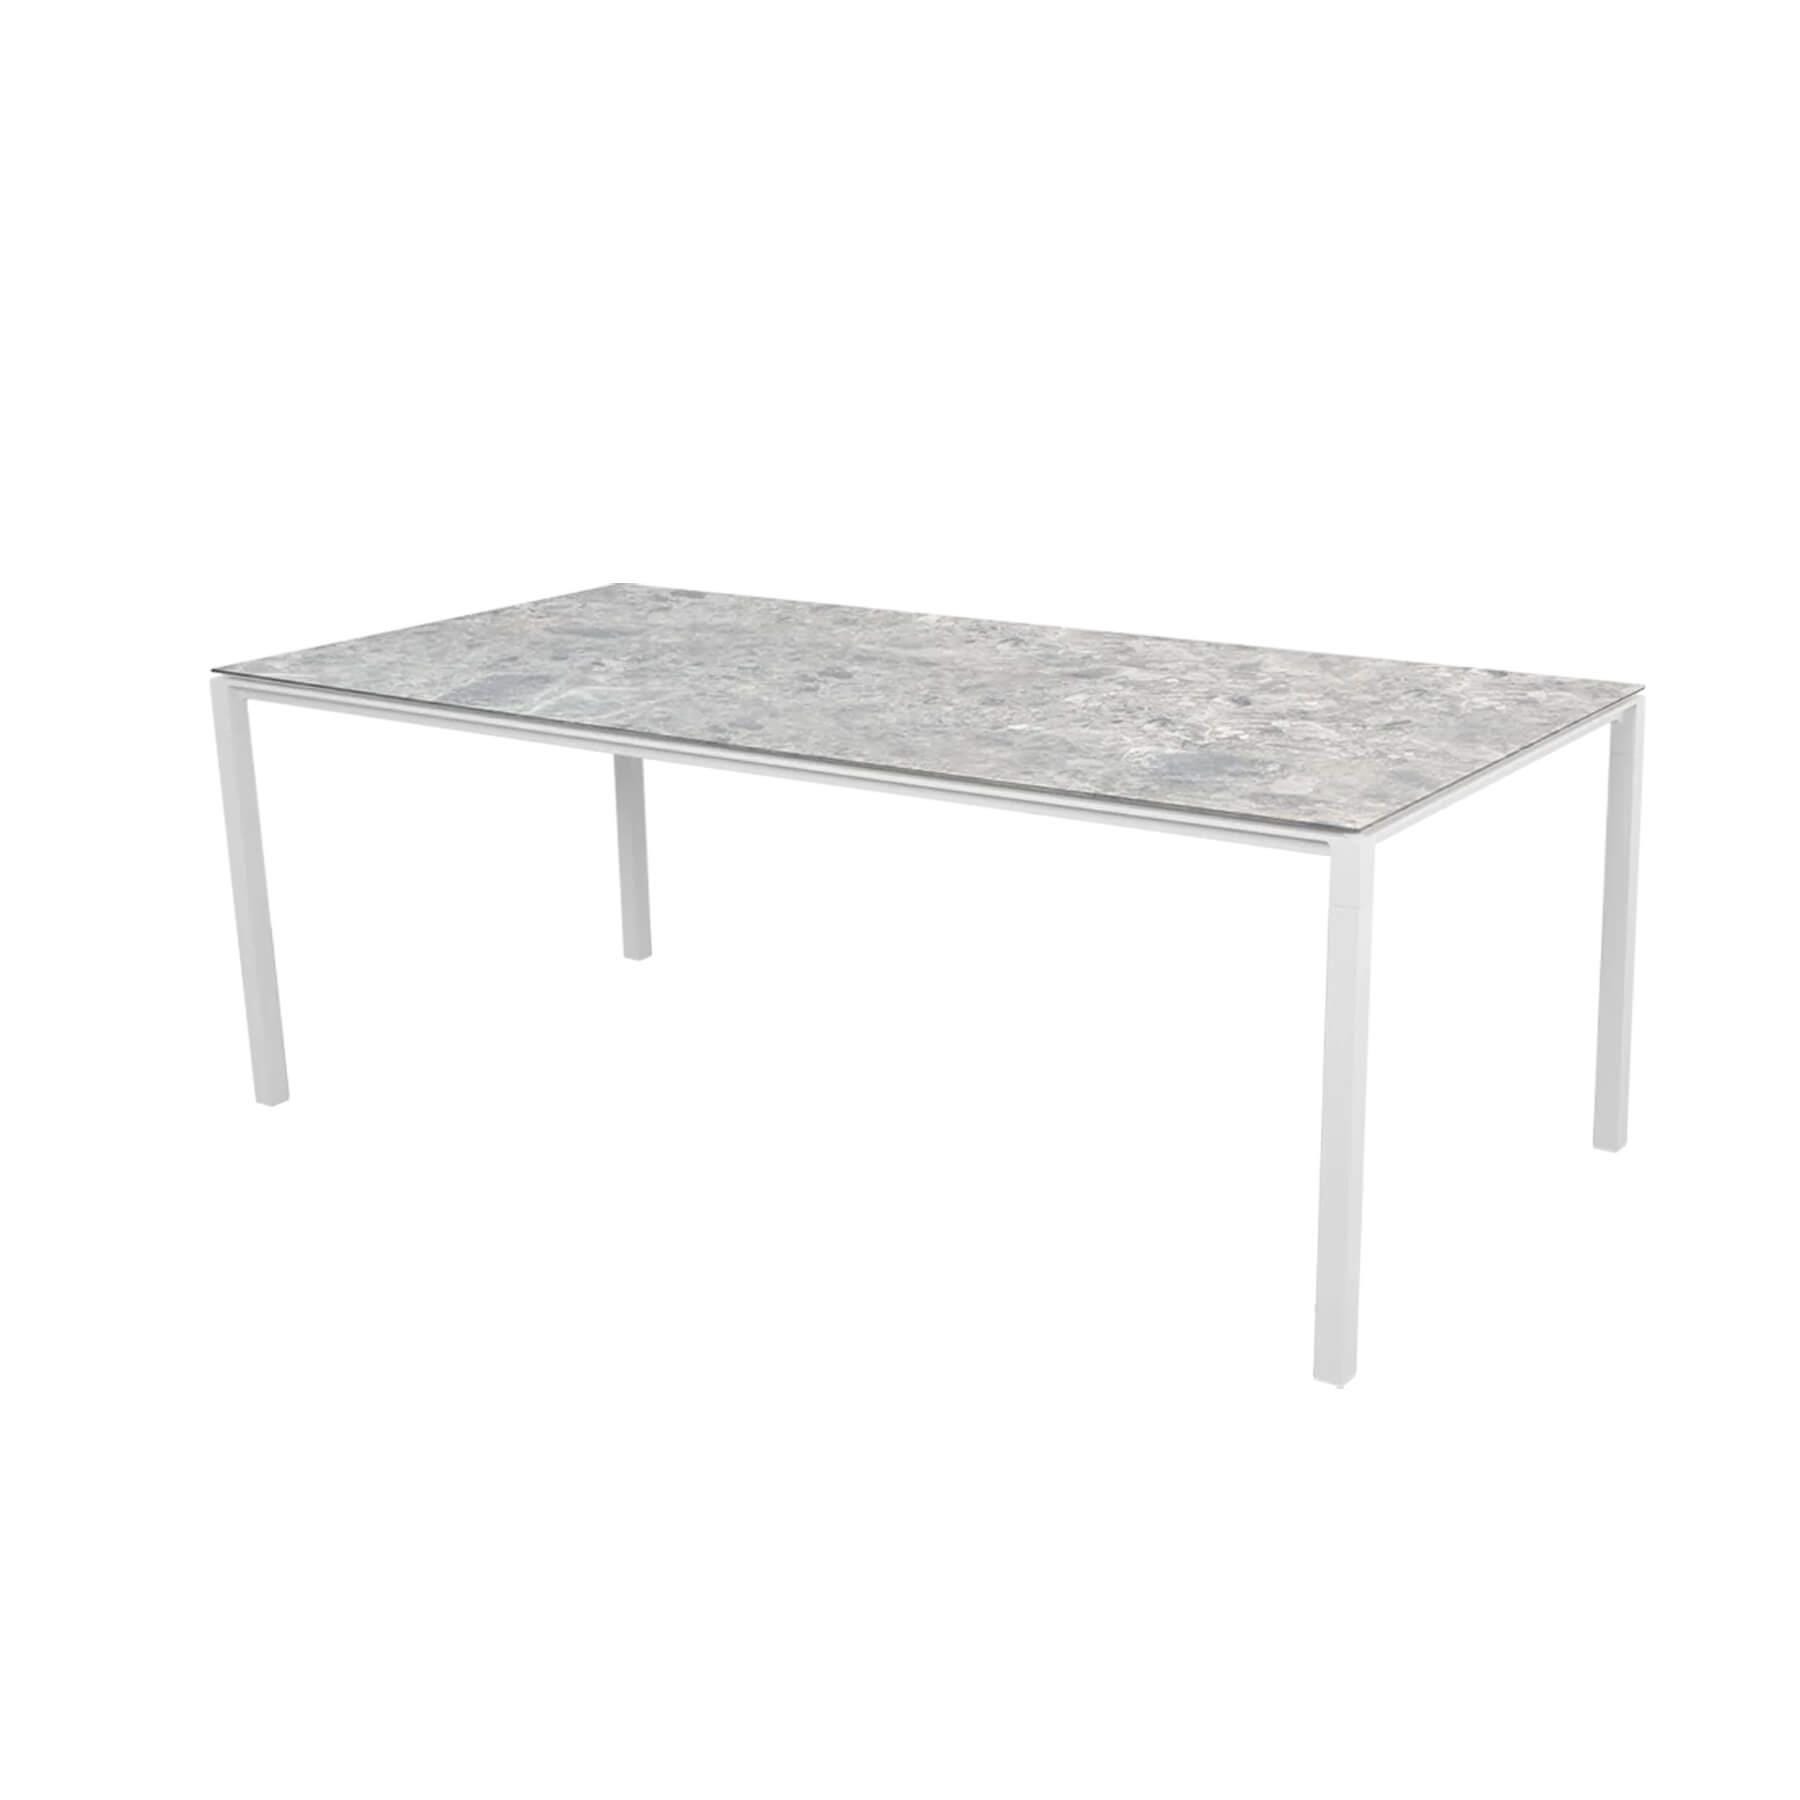 Caneline Pure Outdoor Dining Table Large Ceramic Multi Colour Top White Legs